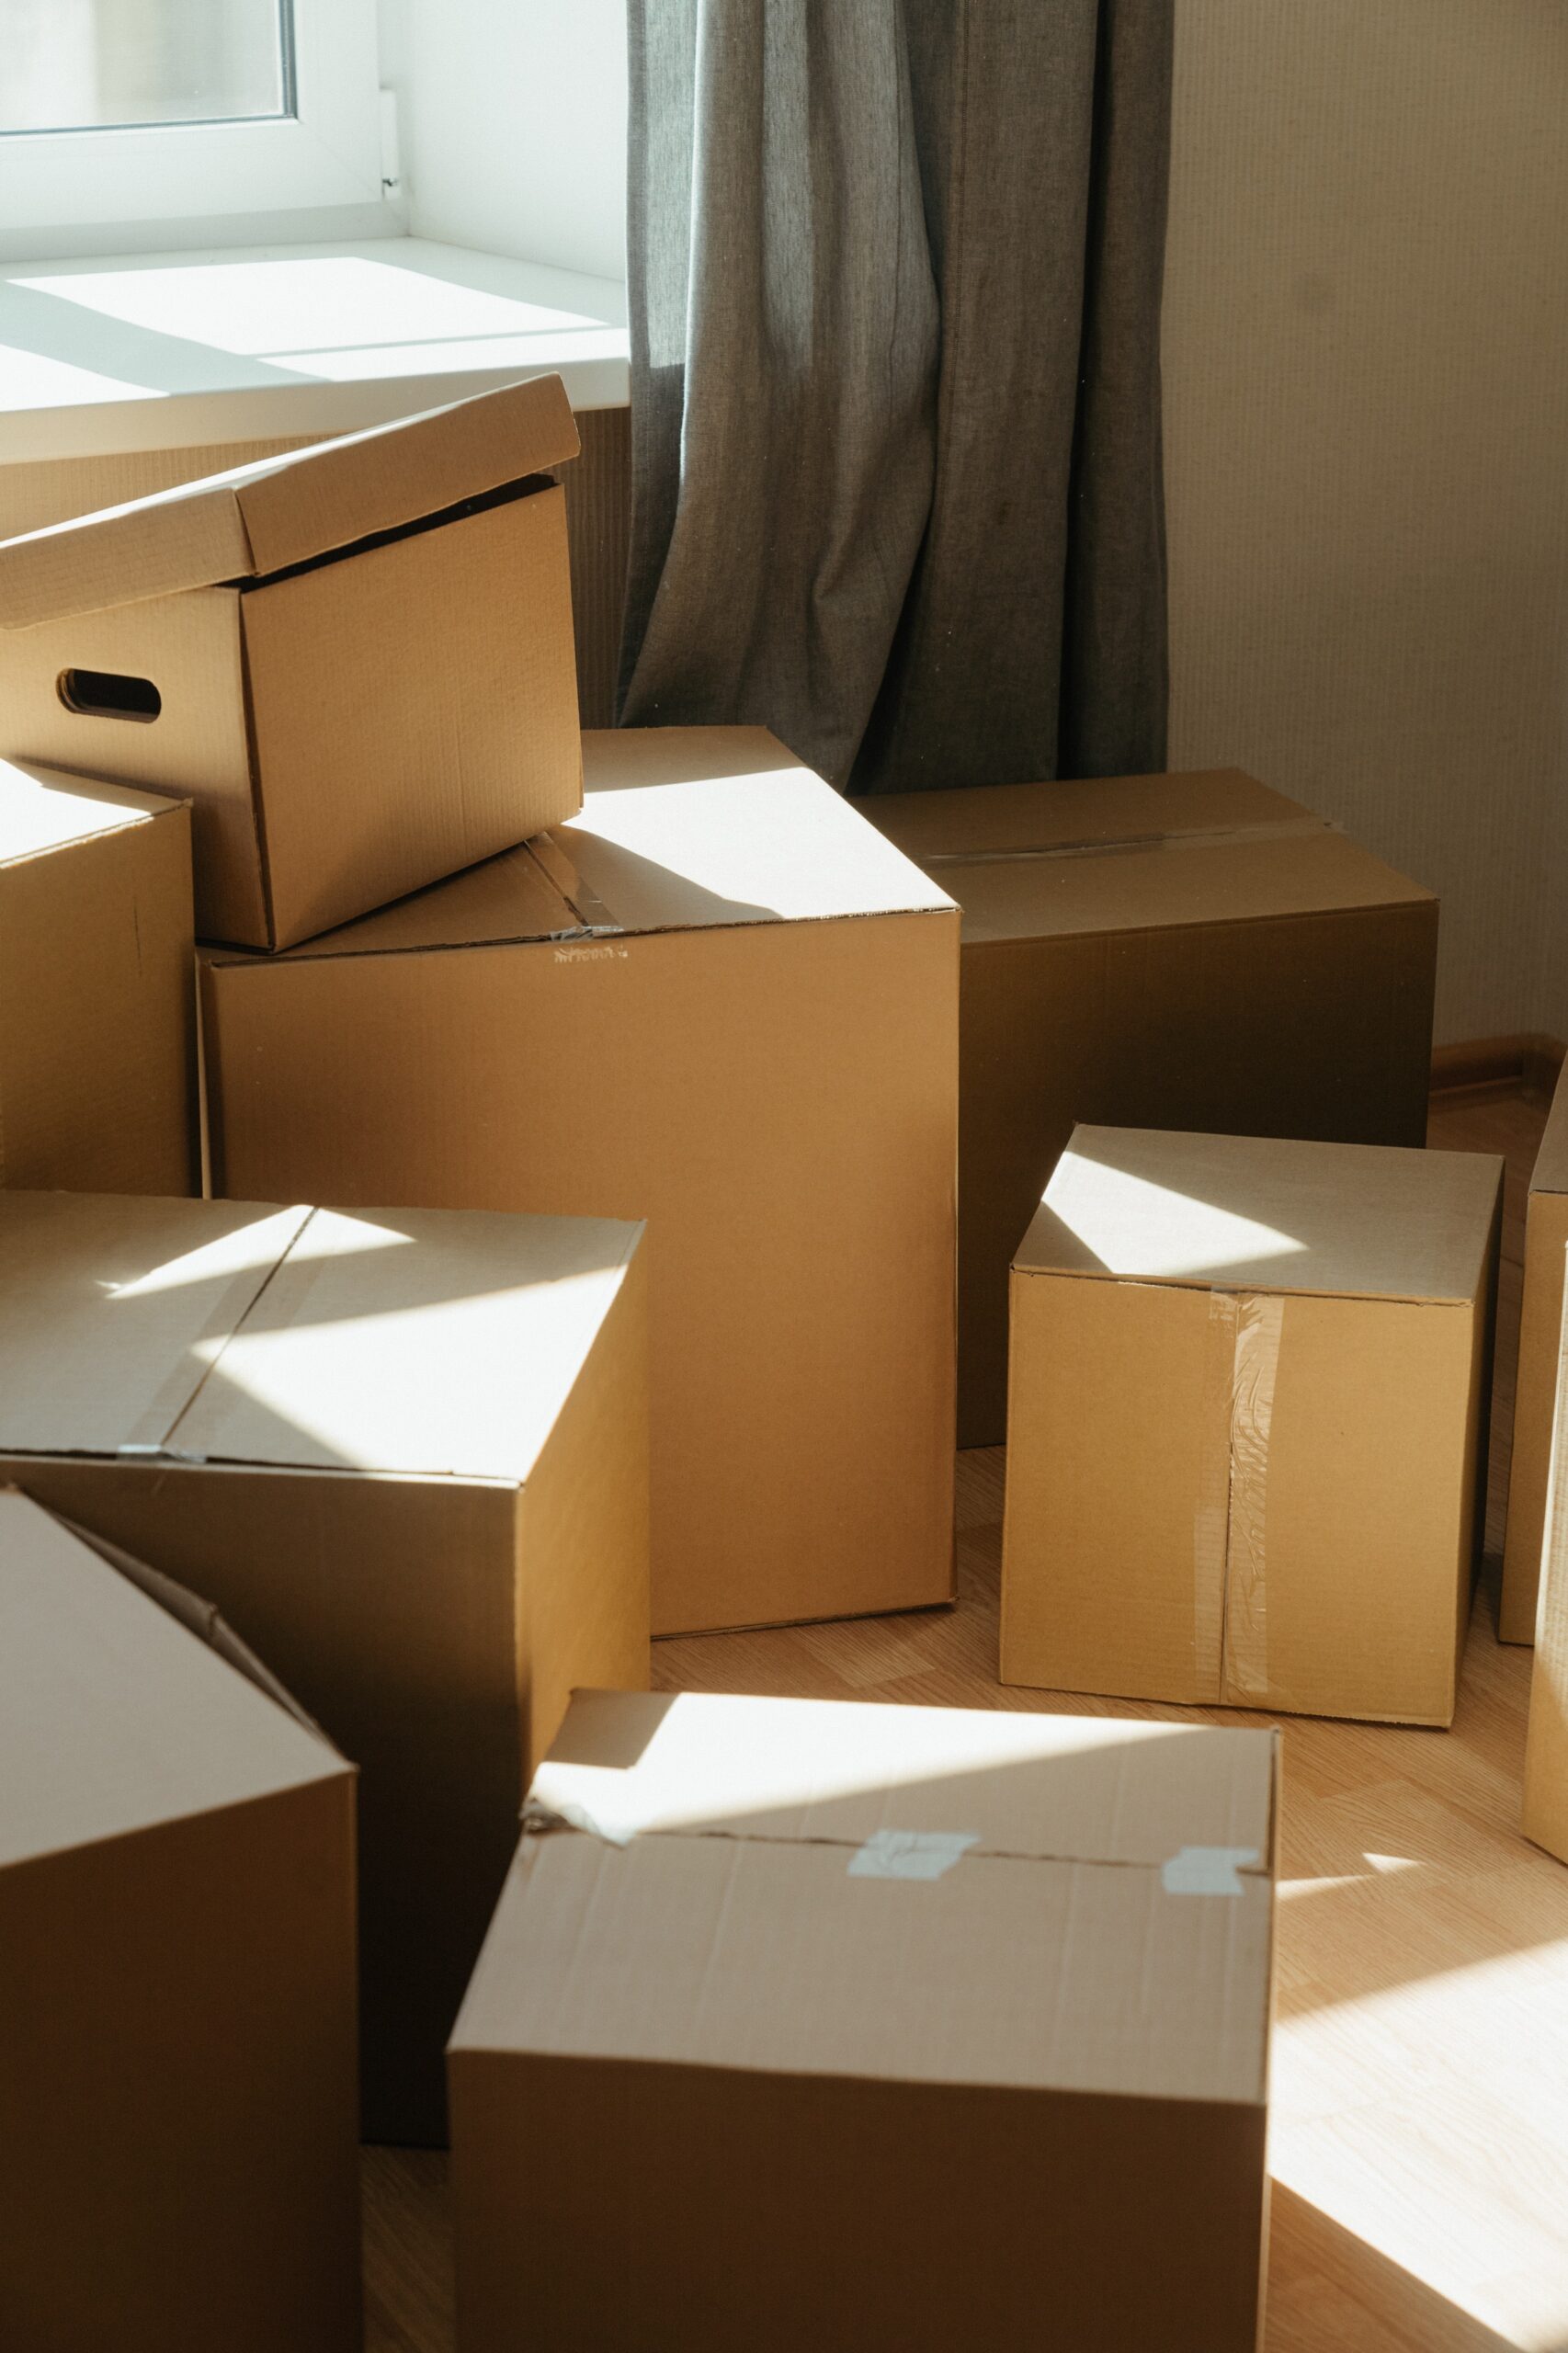 Moving boxes from family who bought home successfully after bankruptcy